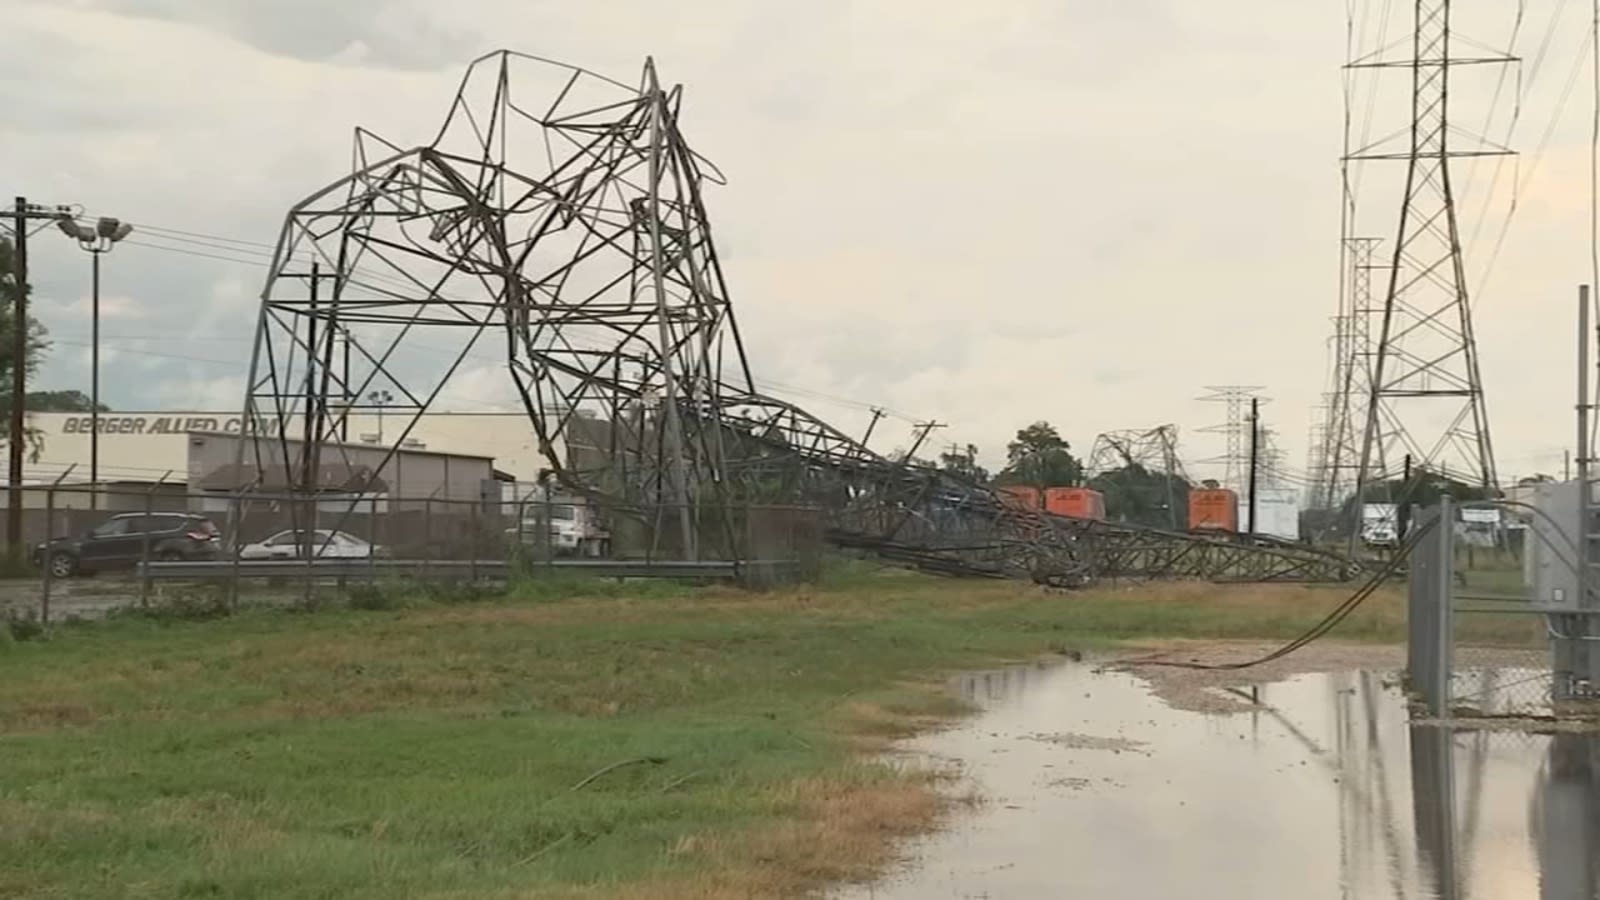 Nearly 30,000 CenterPoint Energy customers still in the dark 1 week after deadly storm in Houston